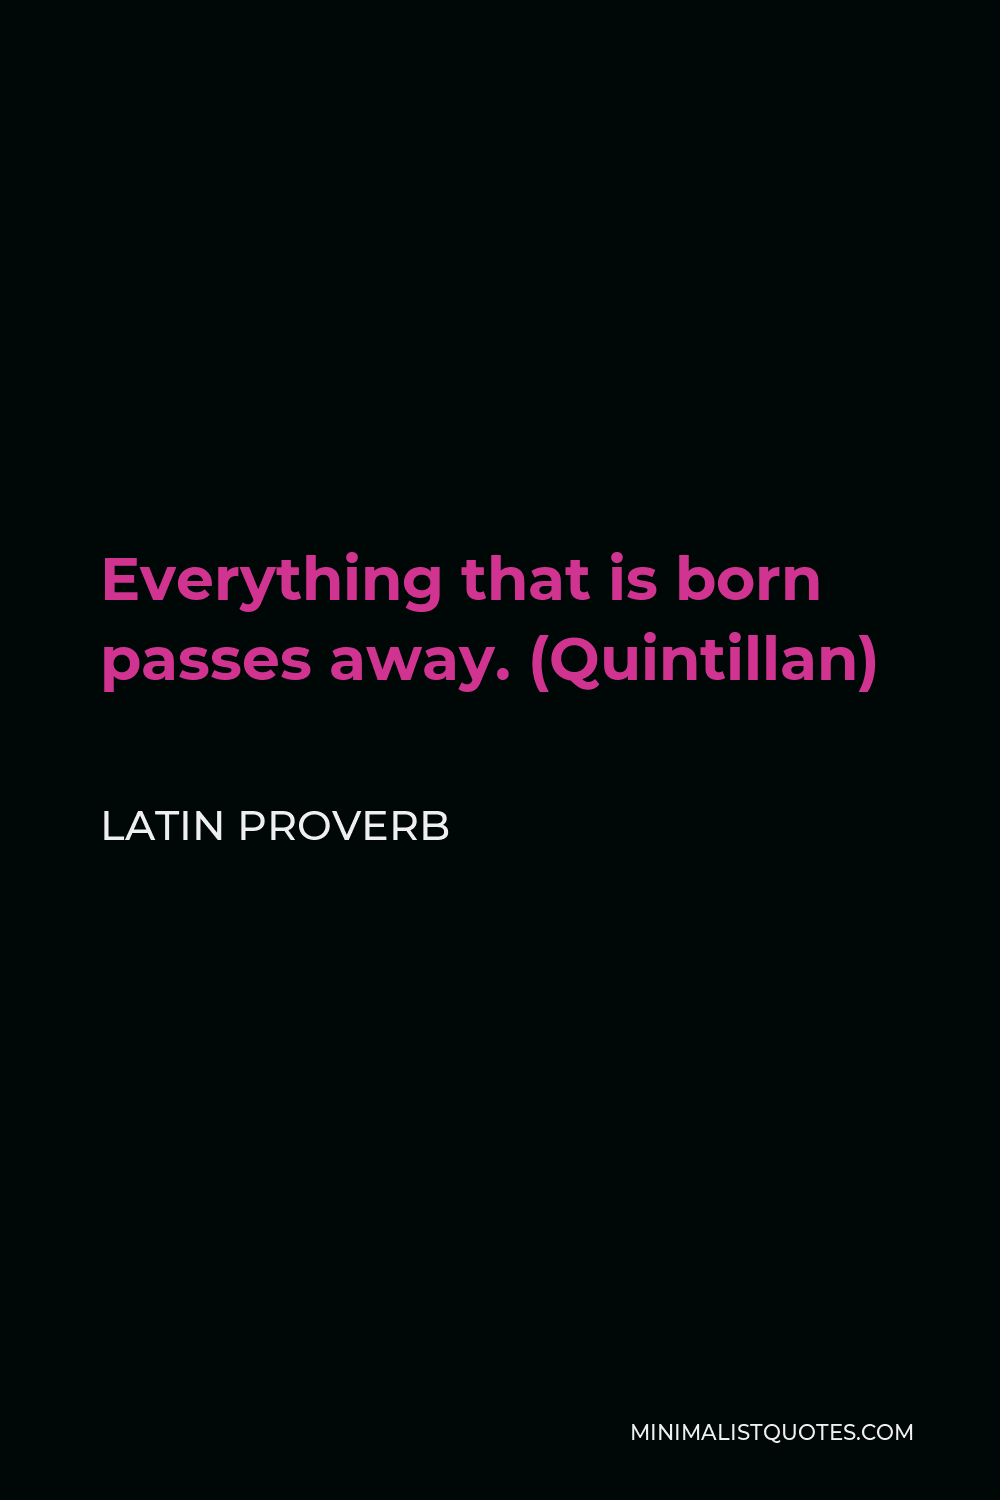 Latin Proverb Quote - Everything that is born passes away. (Quintillan)